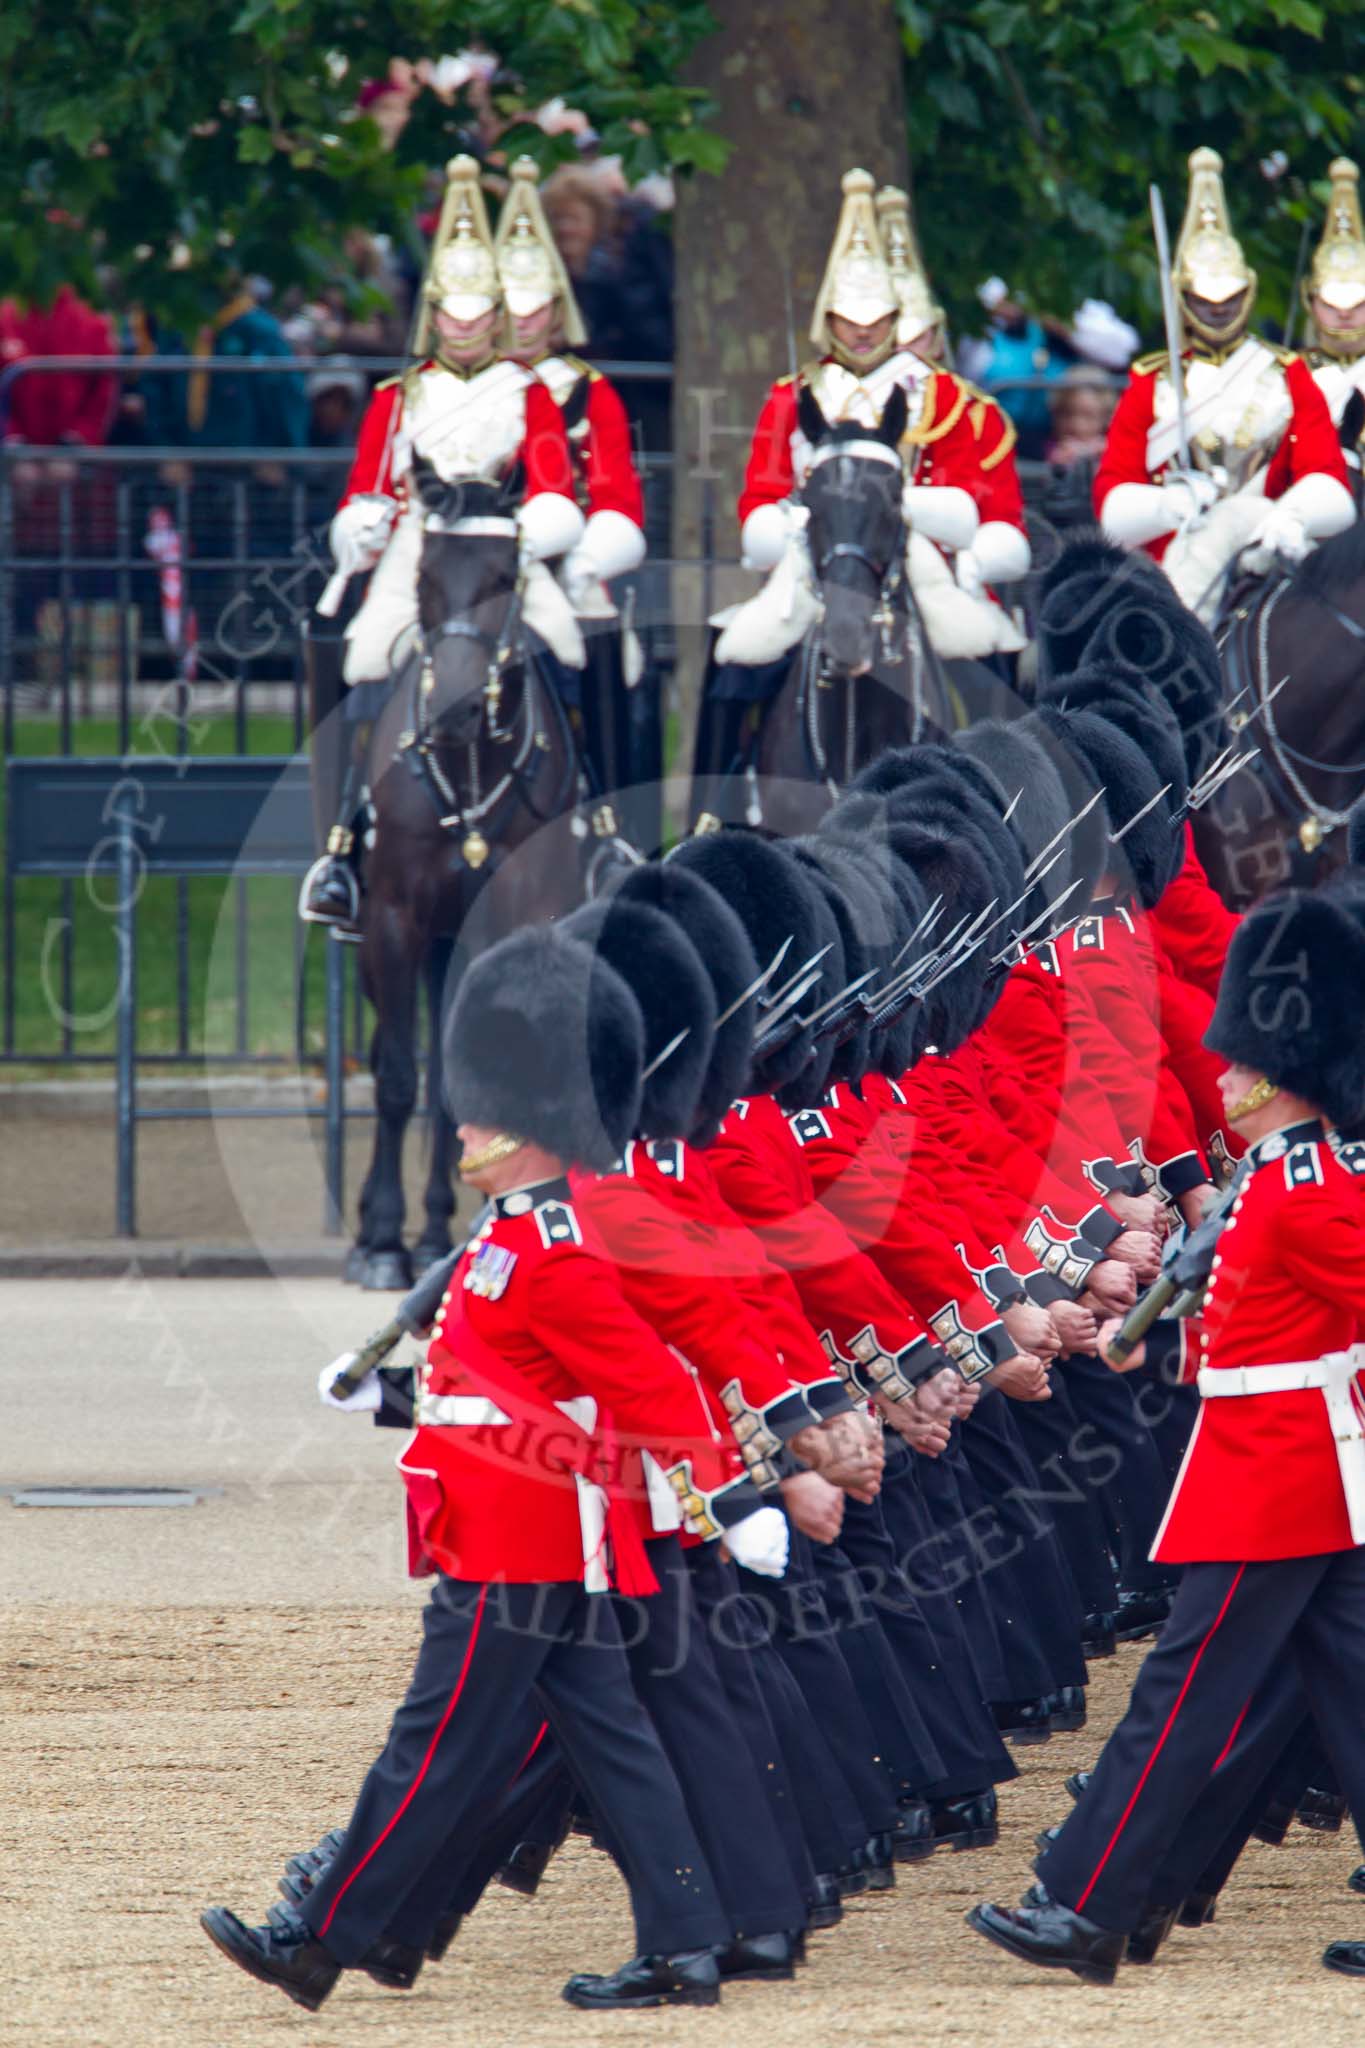 Trooping the Colour 2011: No. 1 Guard, the Escort to the Colour, during the March Past. In the background, The Life Guards from the Household Cavalry..
Horse Guards Parade, Westminster,
London SW1,
Greater London,
United Kingdom,
on 11 June 2011 at 11:43, image #275